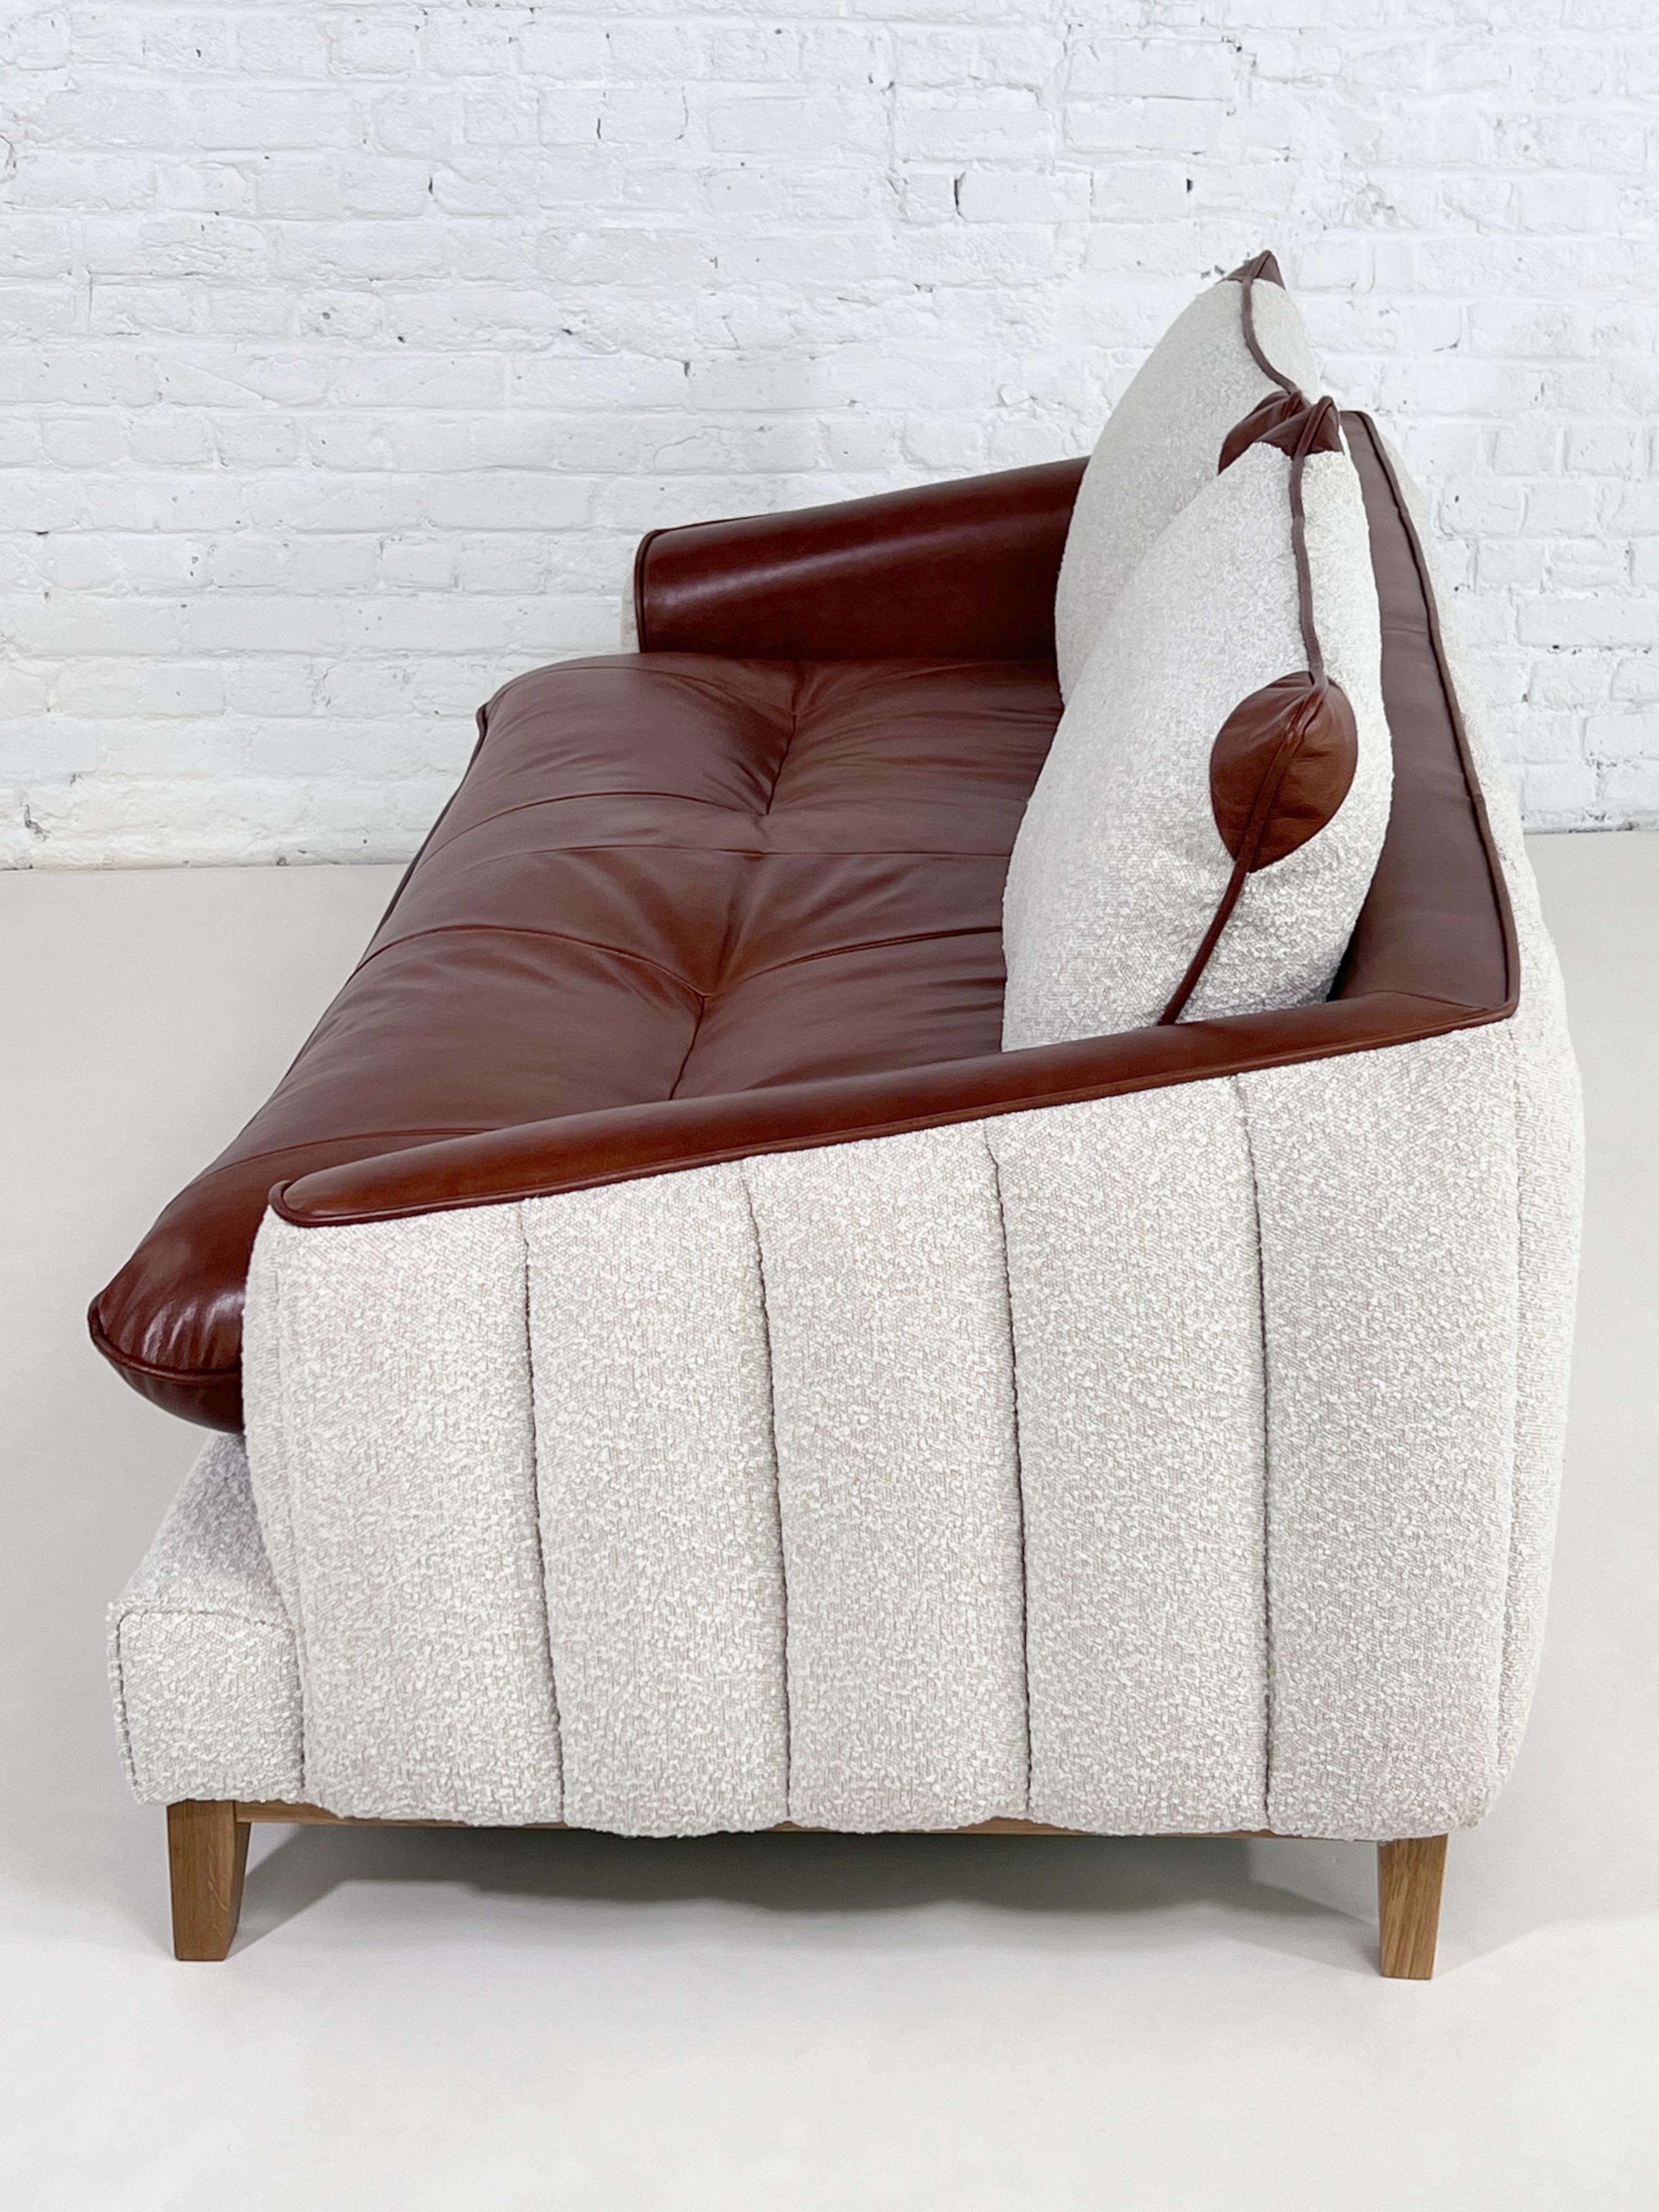 MCM And Scandinavian Design Style Cognac Leather And Beige Bouclé Fabric Sofa with Wooden Base Finishes.